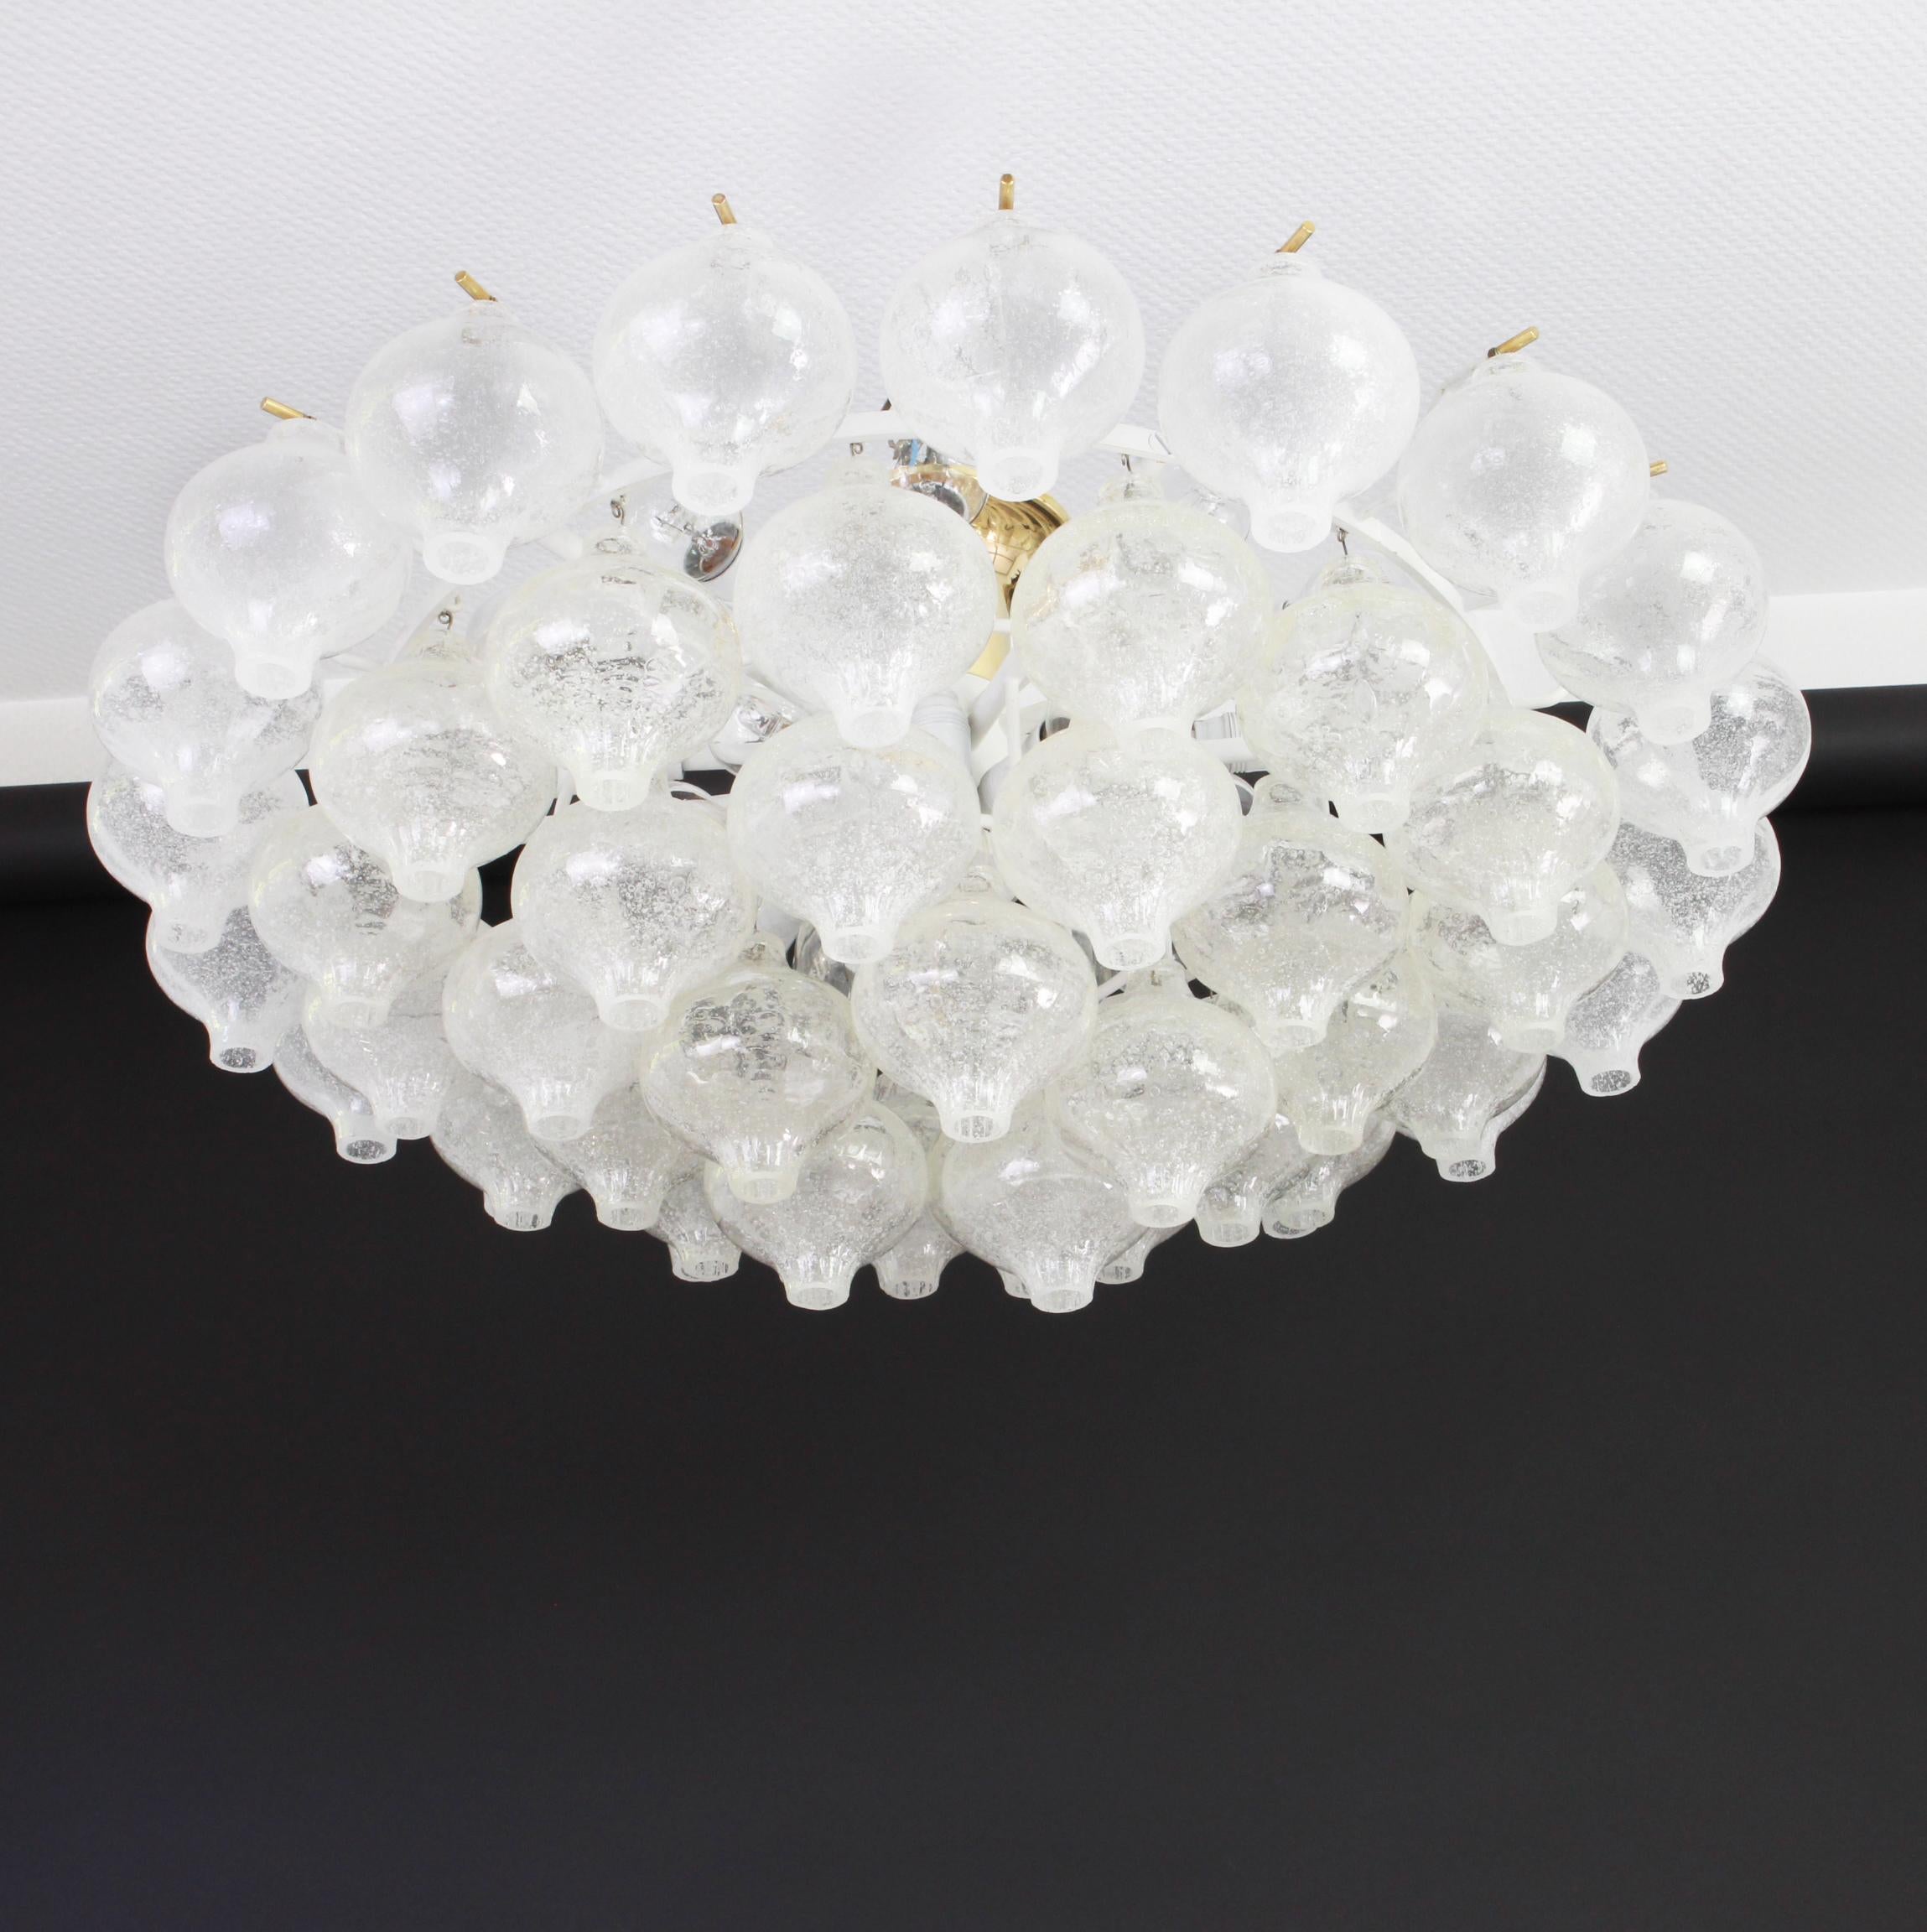 Wonderful onion shaped -Tulipan glass chandelier. 51 hand blown glasses suspended on white painted metal frame.
Best of design from the 1960s by Kalmar, Austria. High quality of the materials.

Sockets: The chandelier takes 21 small screw base